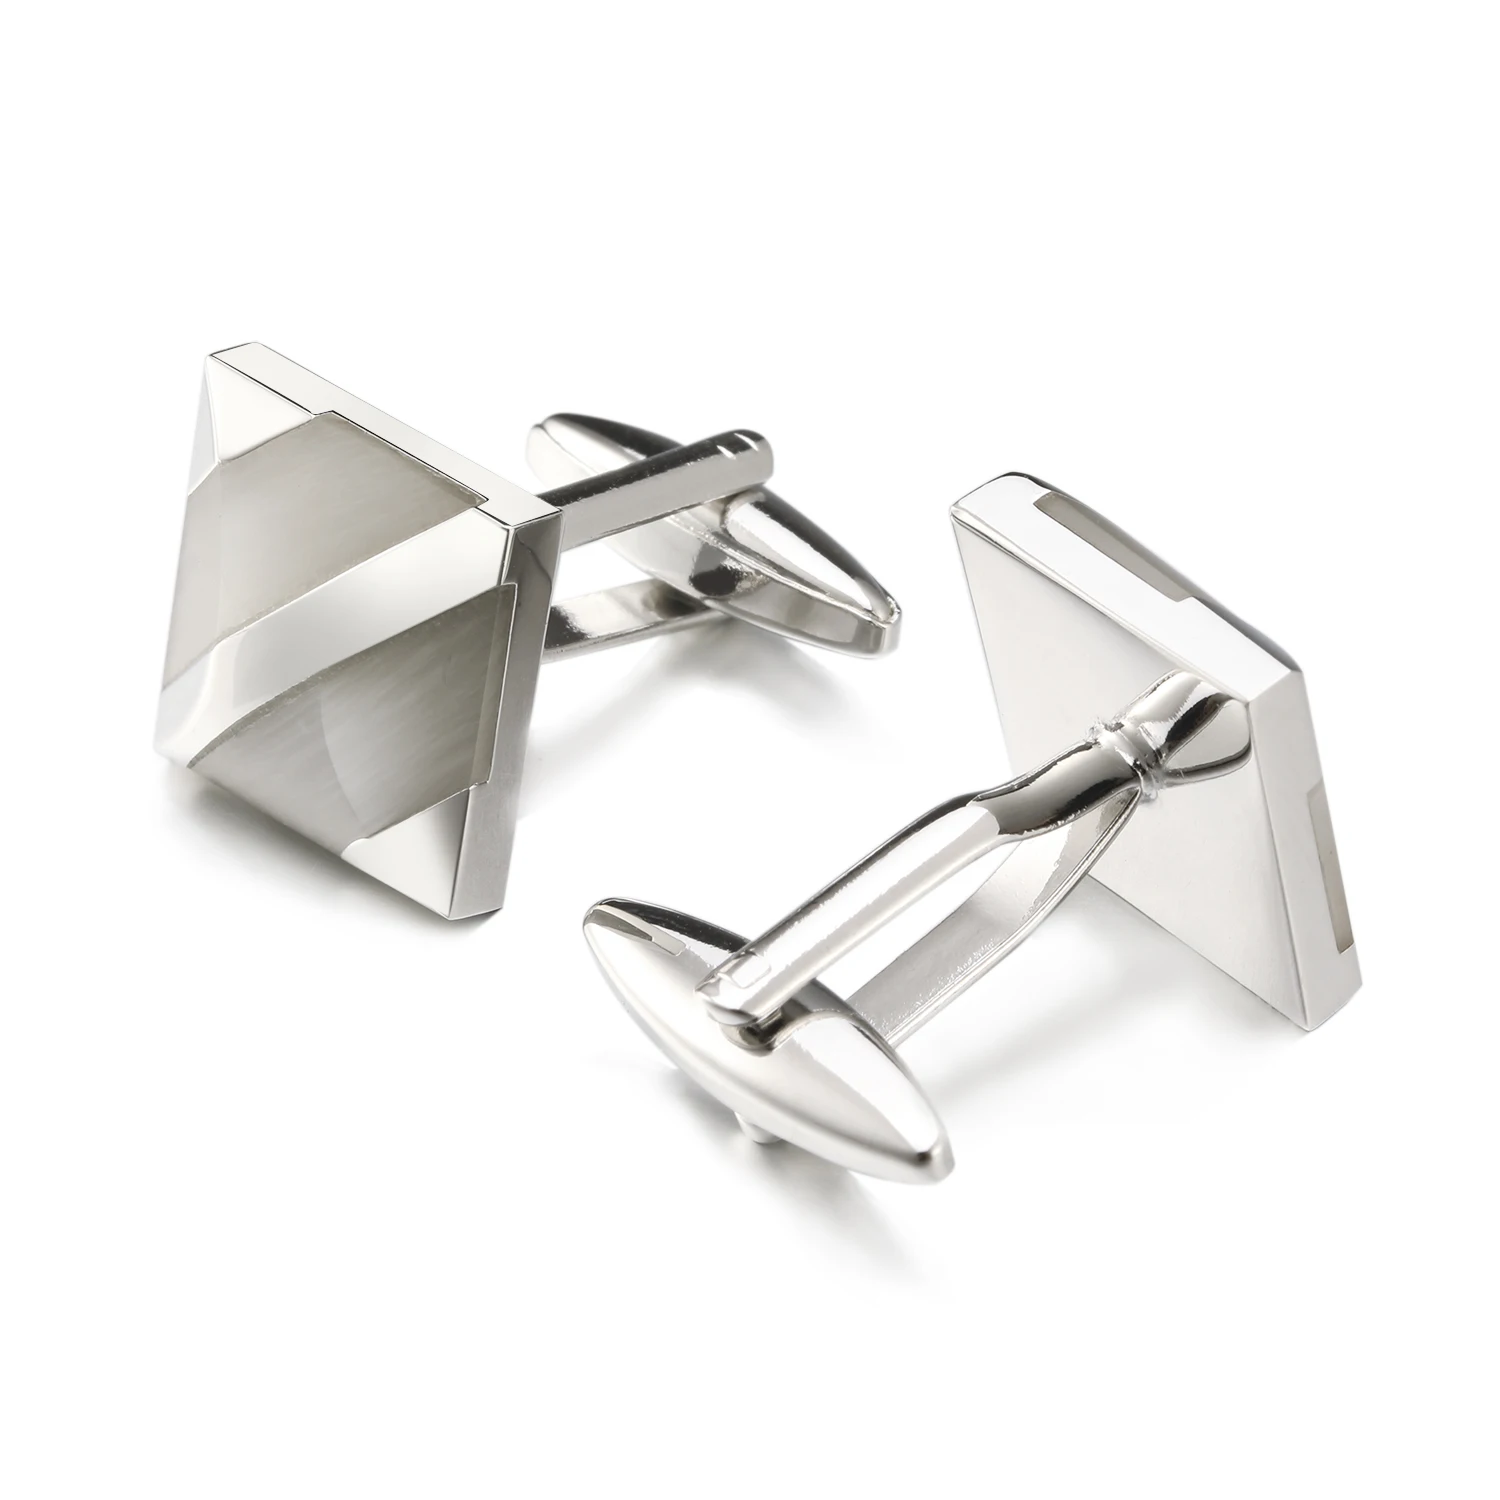 

OB Jewelry-Silver Metal Men Jewelry Cuff links White or Black Stone Splicing Cufflinks Newest Square Cufflinks For Mens Shirts